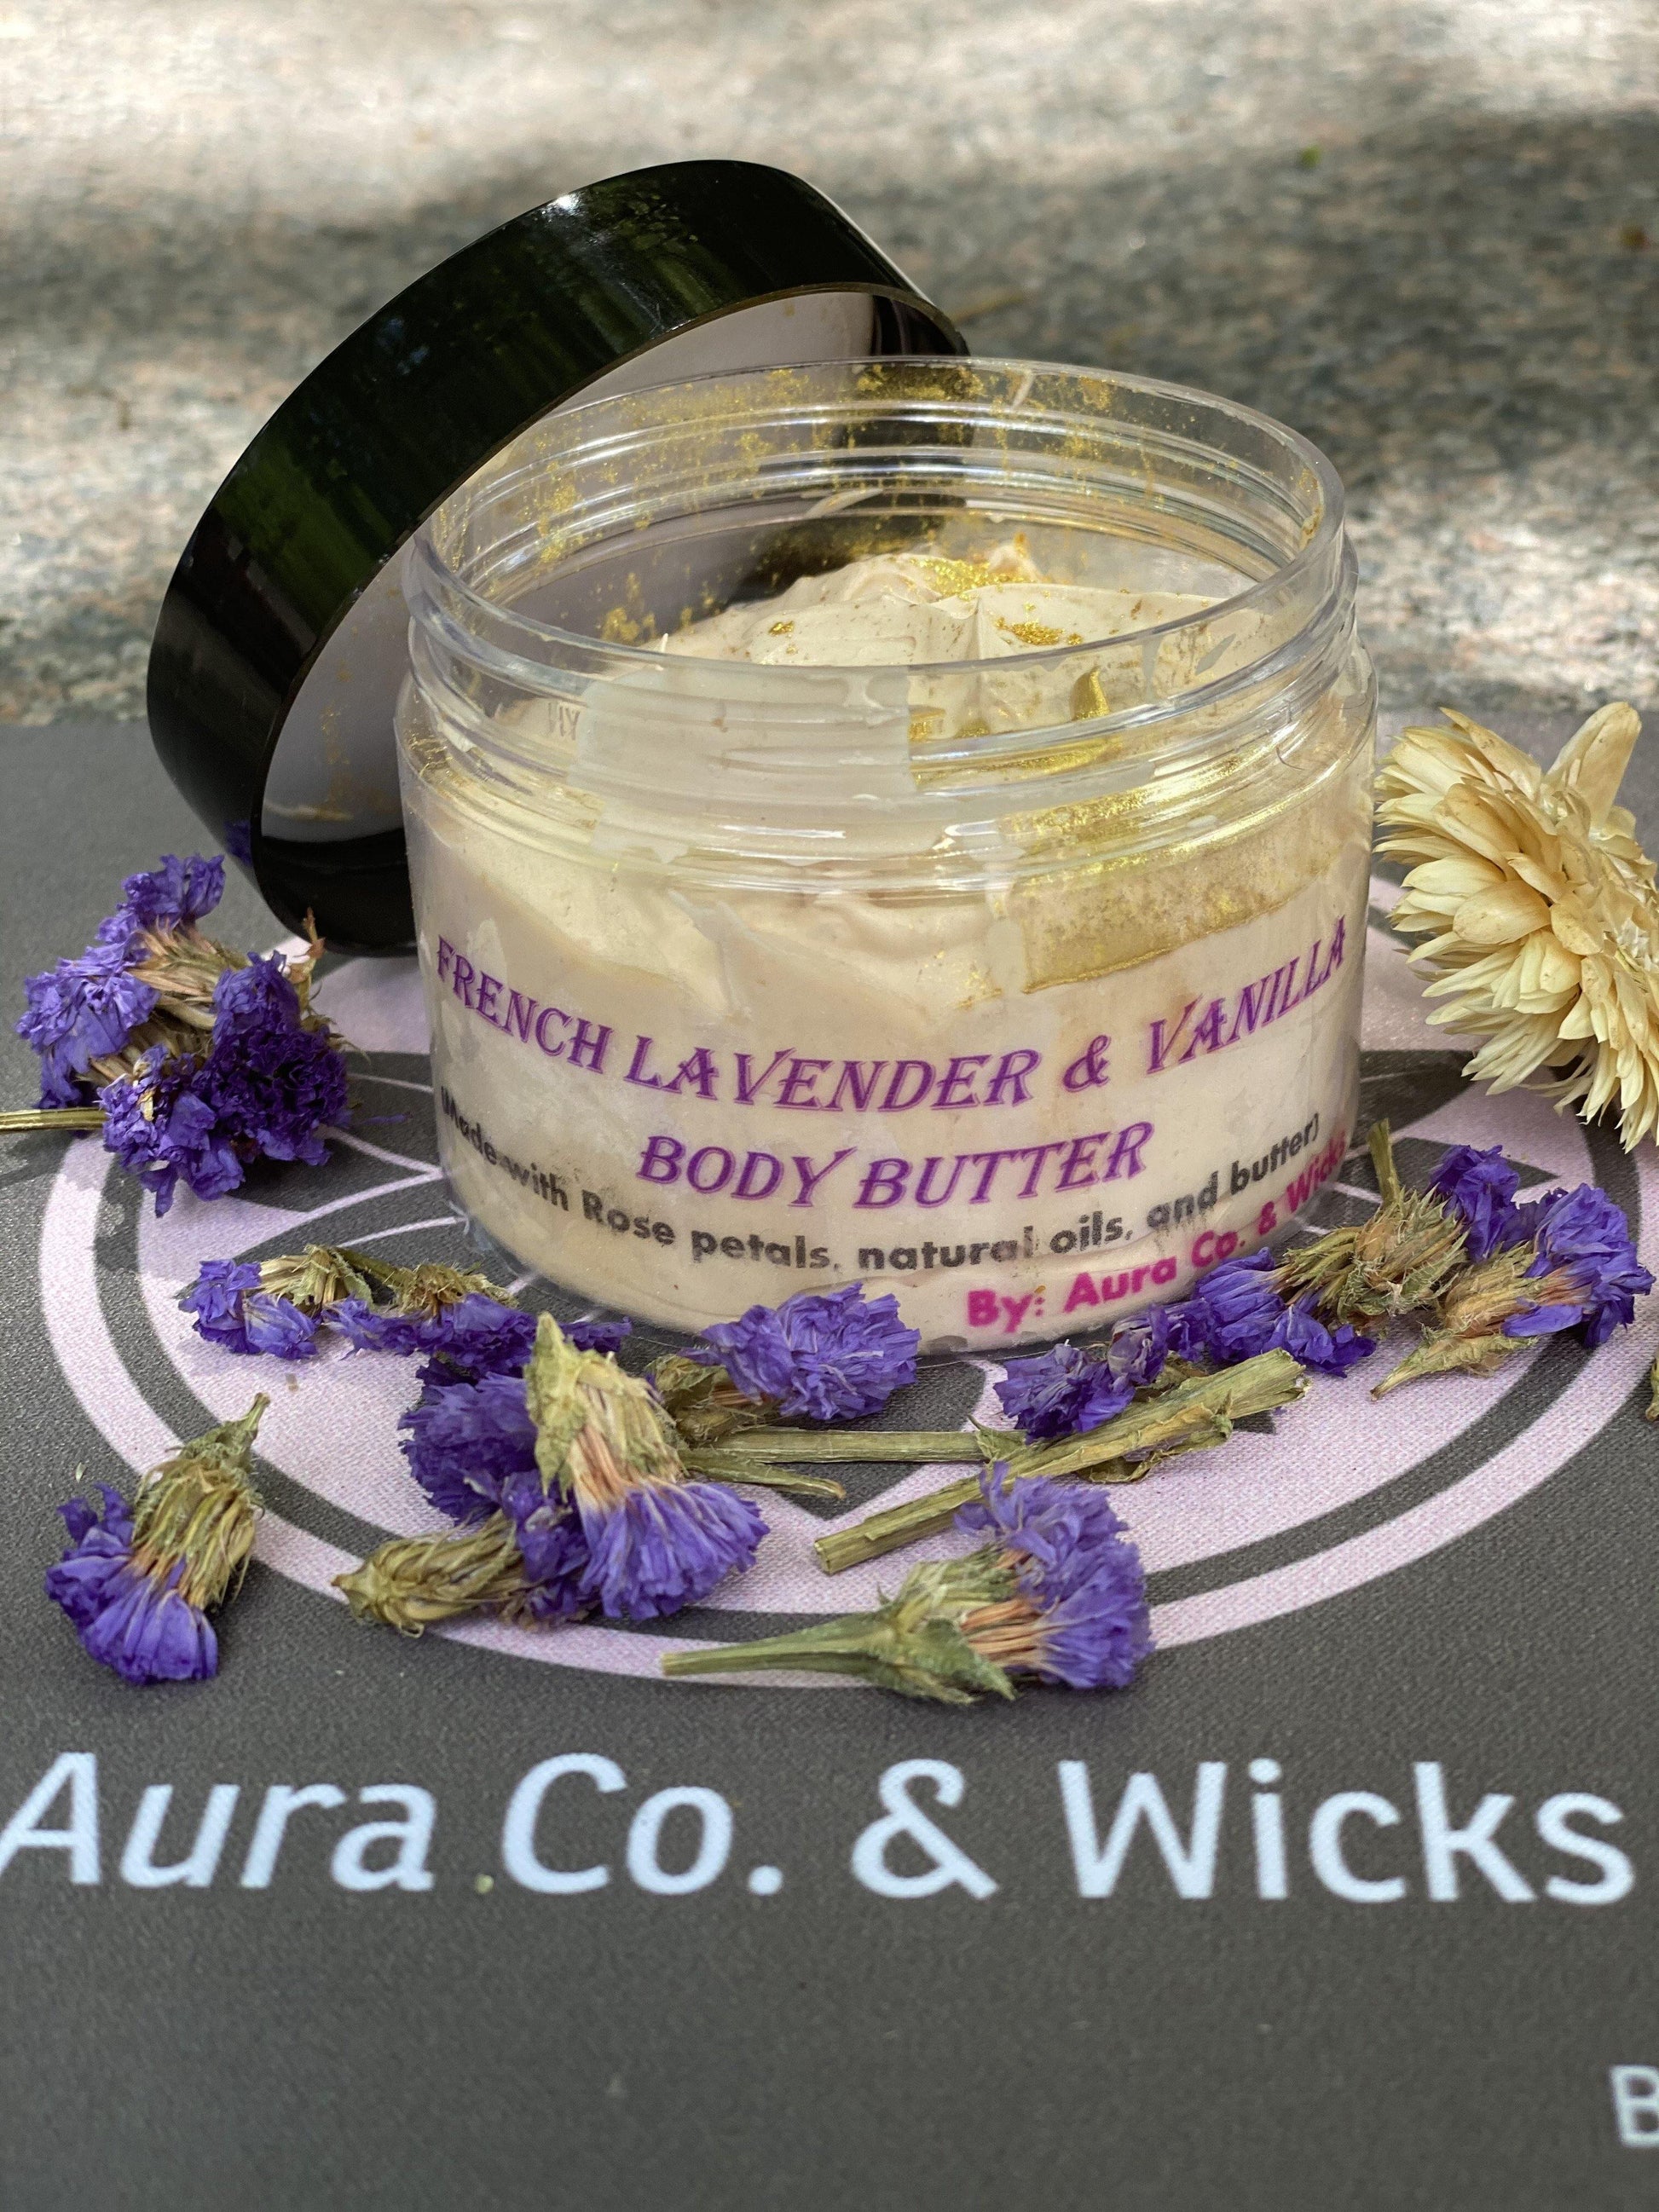 French Lavender and Vanilla Body Butter - Aura Co. & Wicks